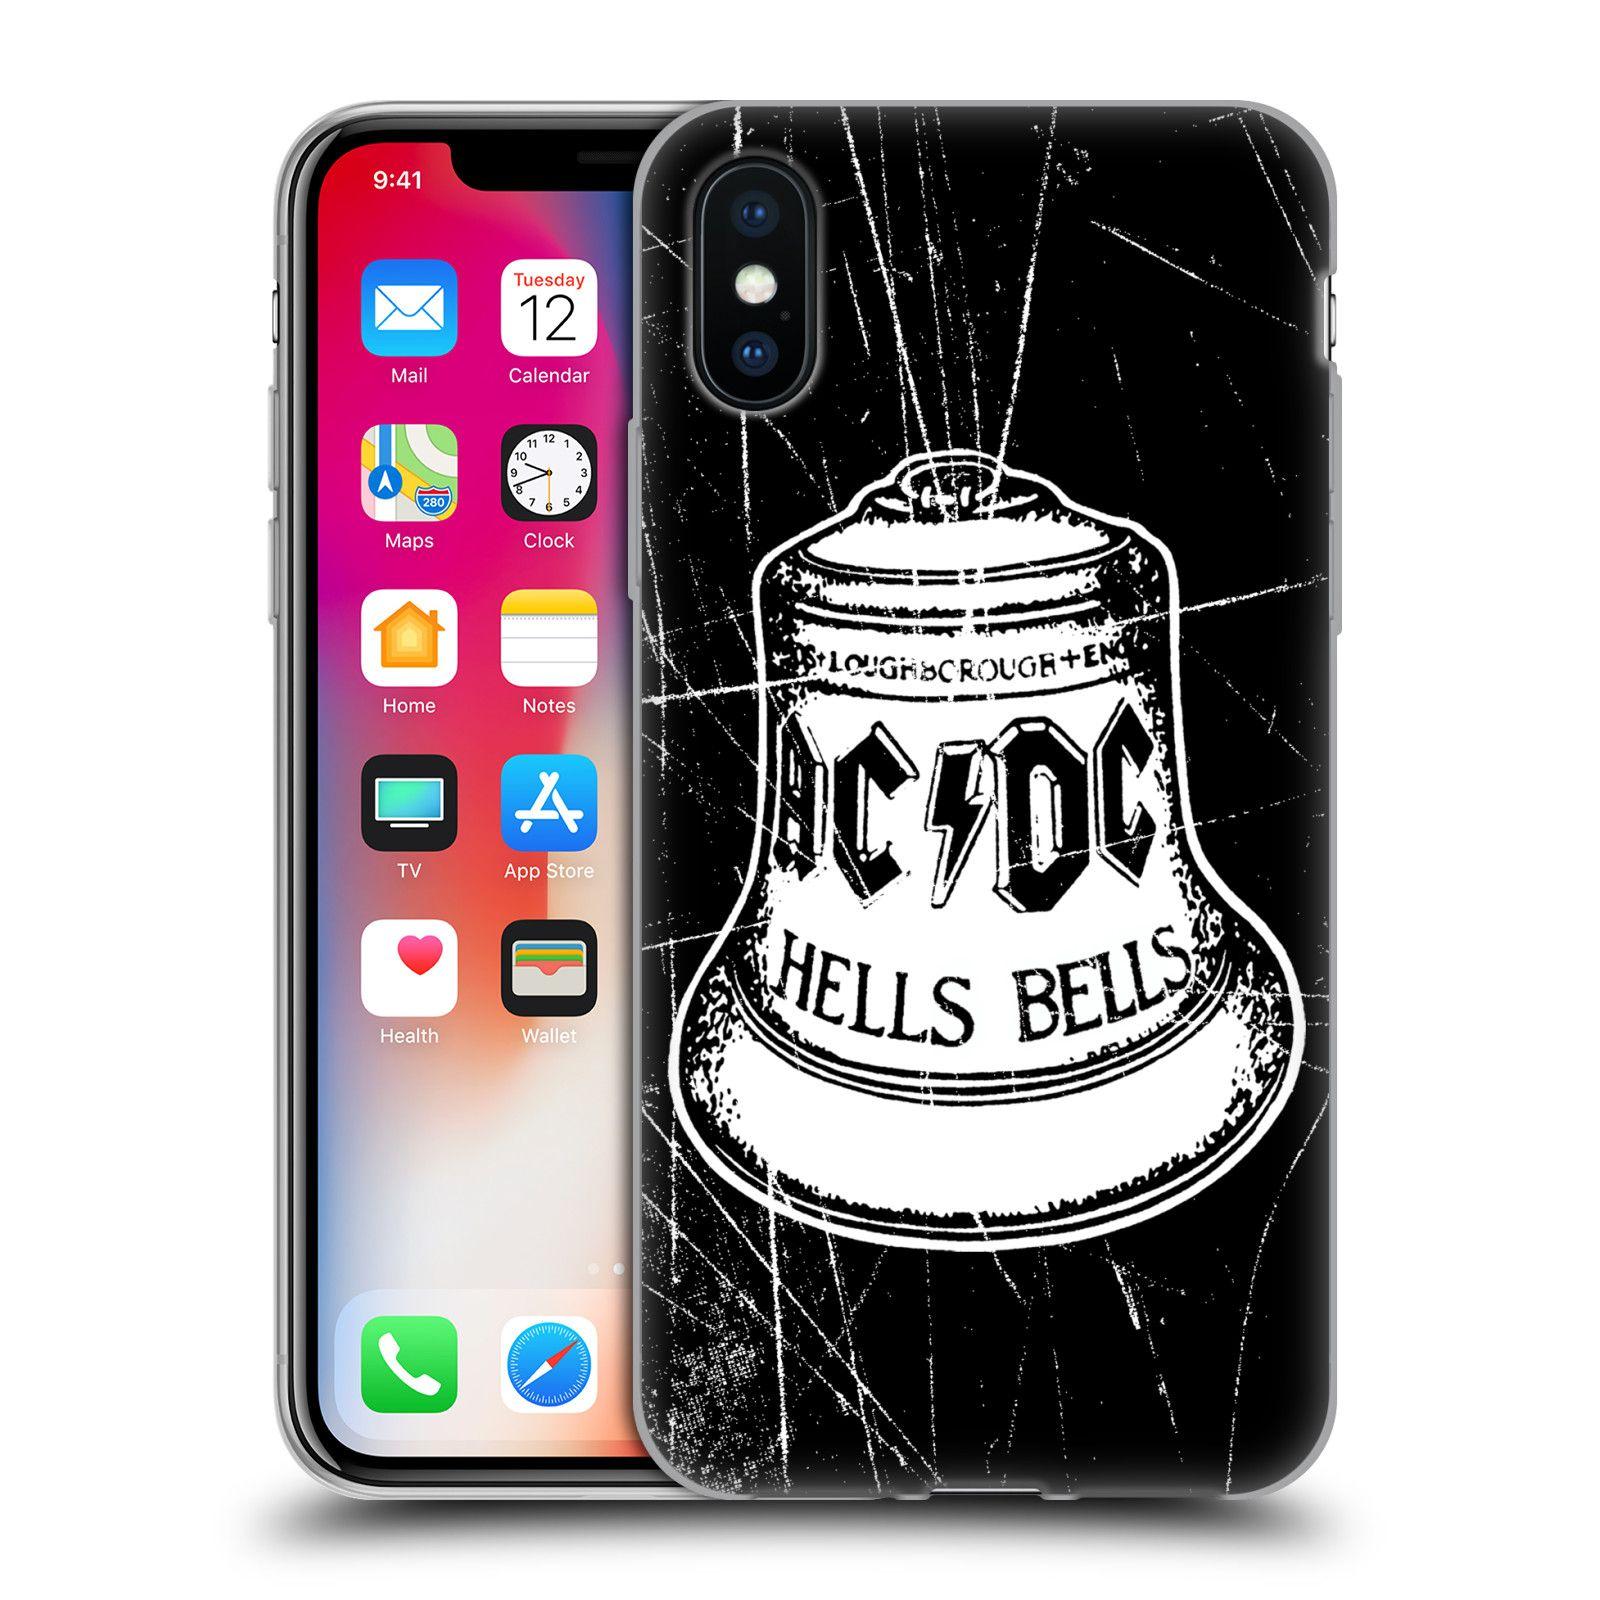 iPhone Clock Logo - OFFICIAL AC/DC ACDC LOGO SOFT GEL CASE FOR APPLE iPHONE PHONES | eBay